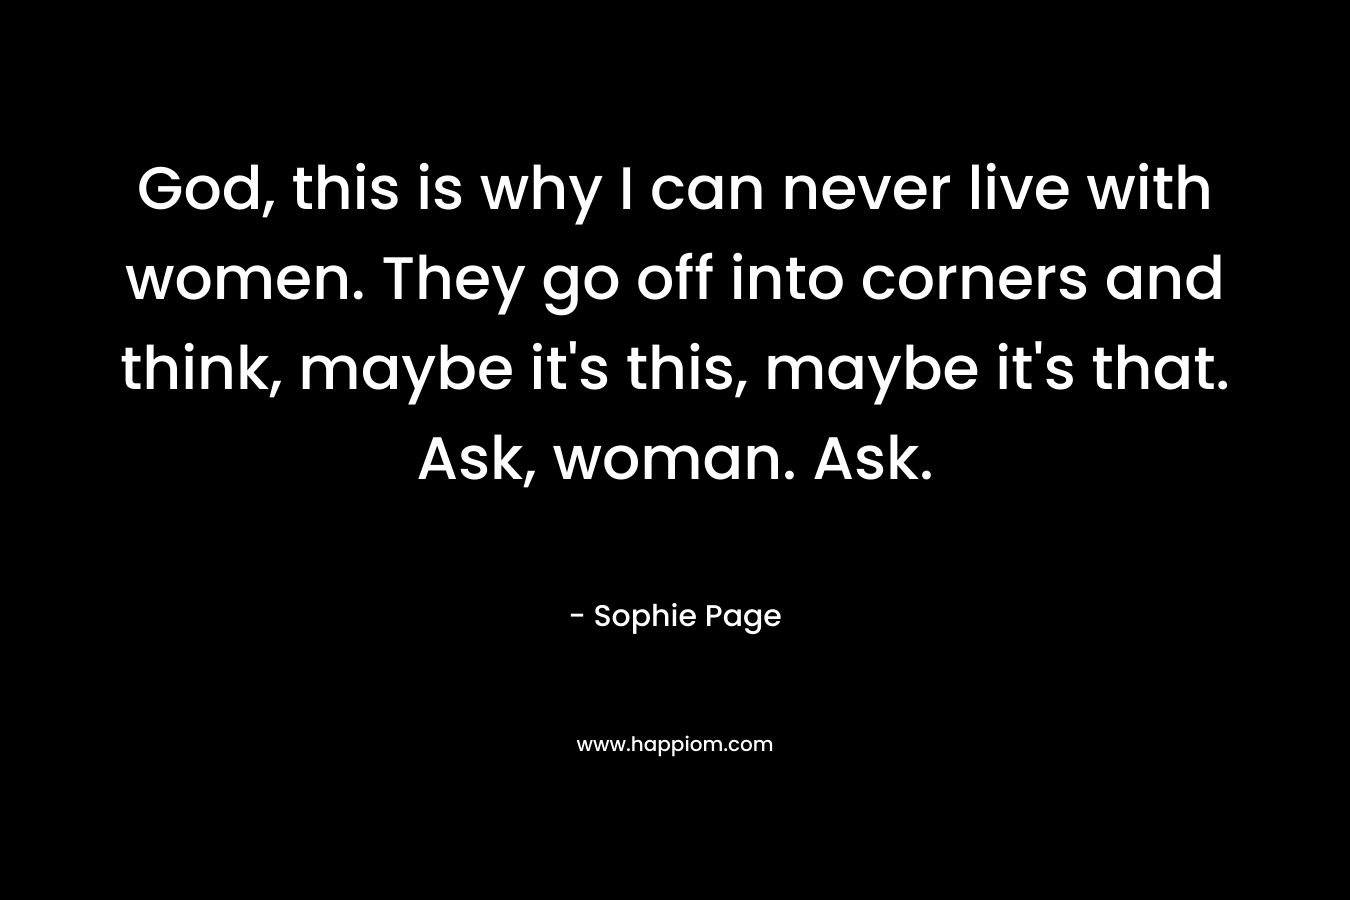 God, this is why I can never live with women. They go off into corners and think, maybe it’s this, maybe it’s that. Ask, woman. Ask. – Sophie Page